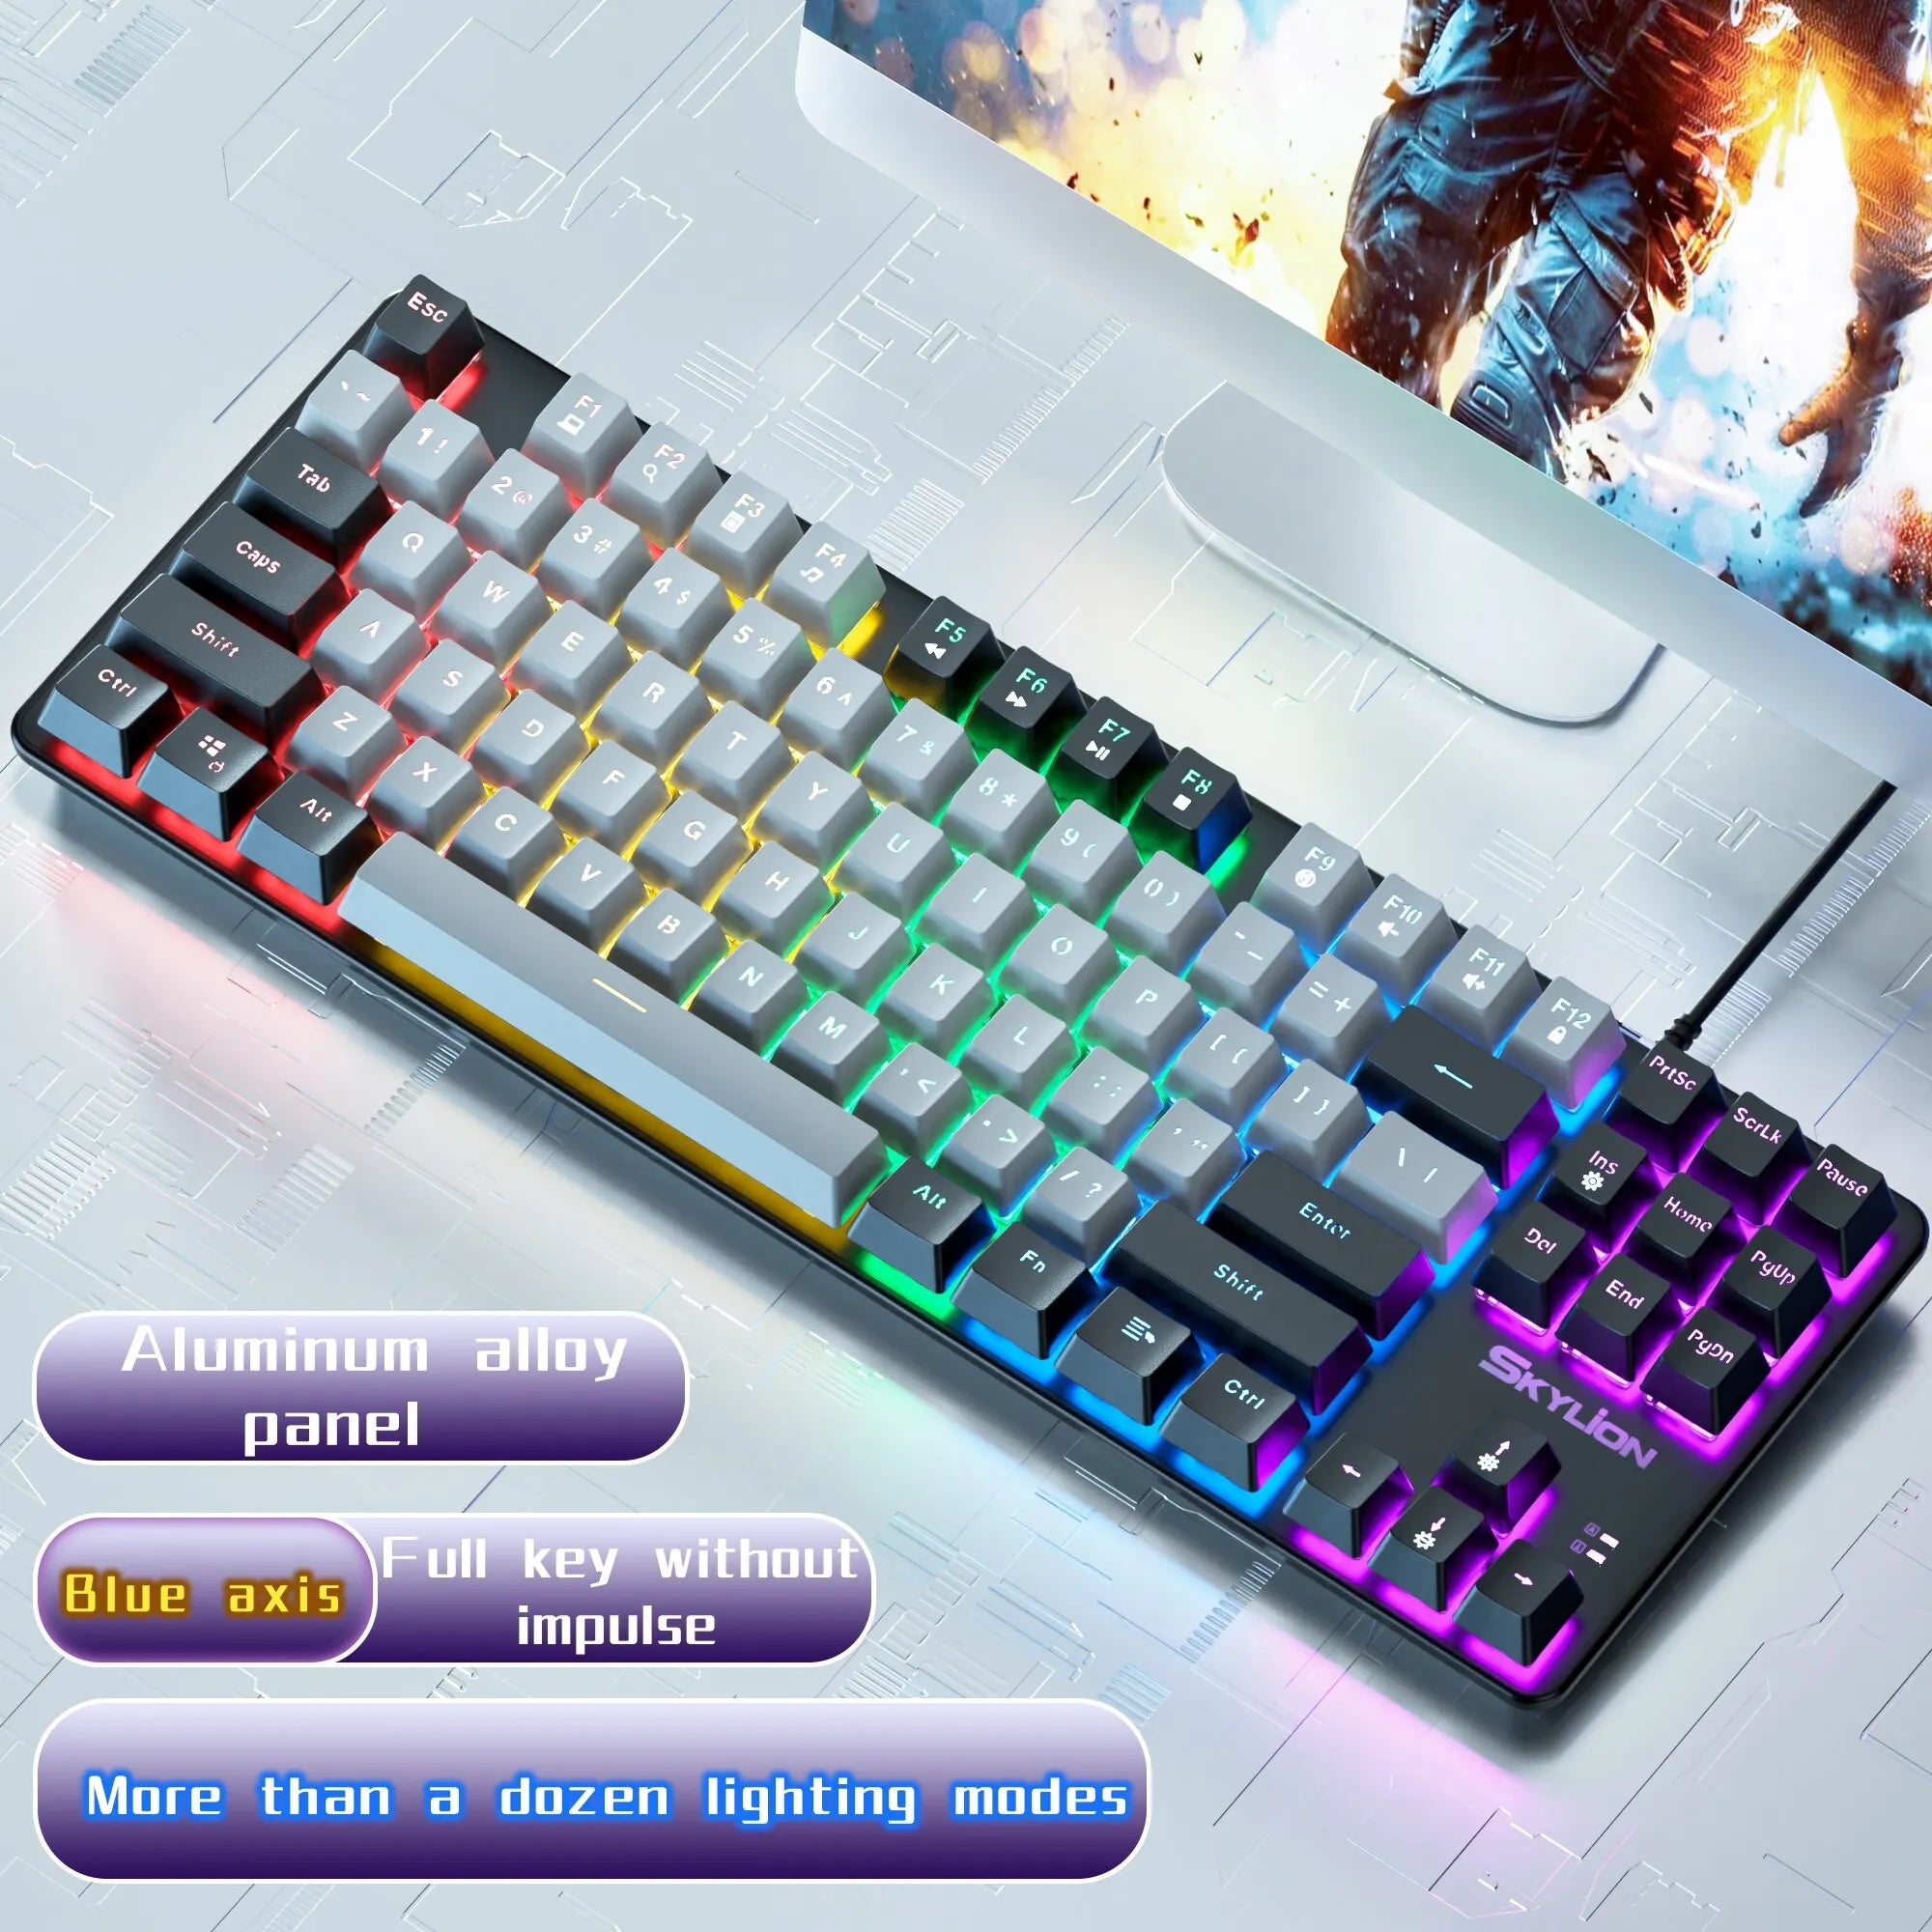 SKYLION H87 Wired Mechanical Keyboard: 10 Colorful Lighting Modes for Gaming & Office | Compatible with Windows & iOS Green Shaft / grey-black